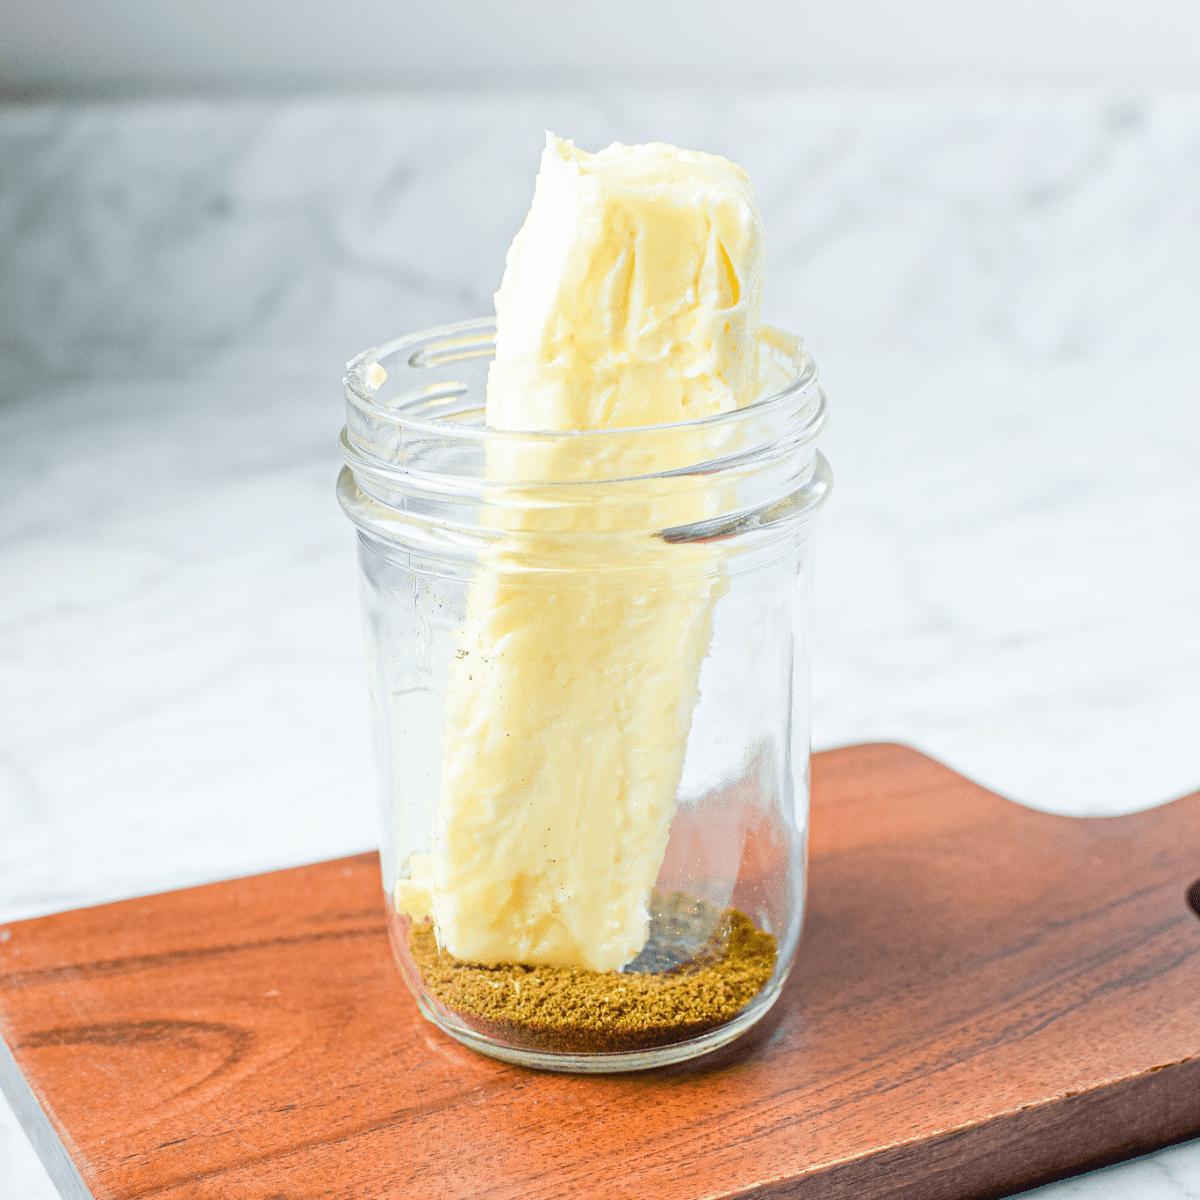 https://emilykylenutrition.com/wp-content/uploads/2023/01/Best-Butter-for-Cannabutter-by-Emily-Kyle6.png